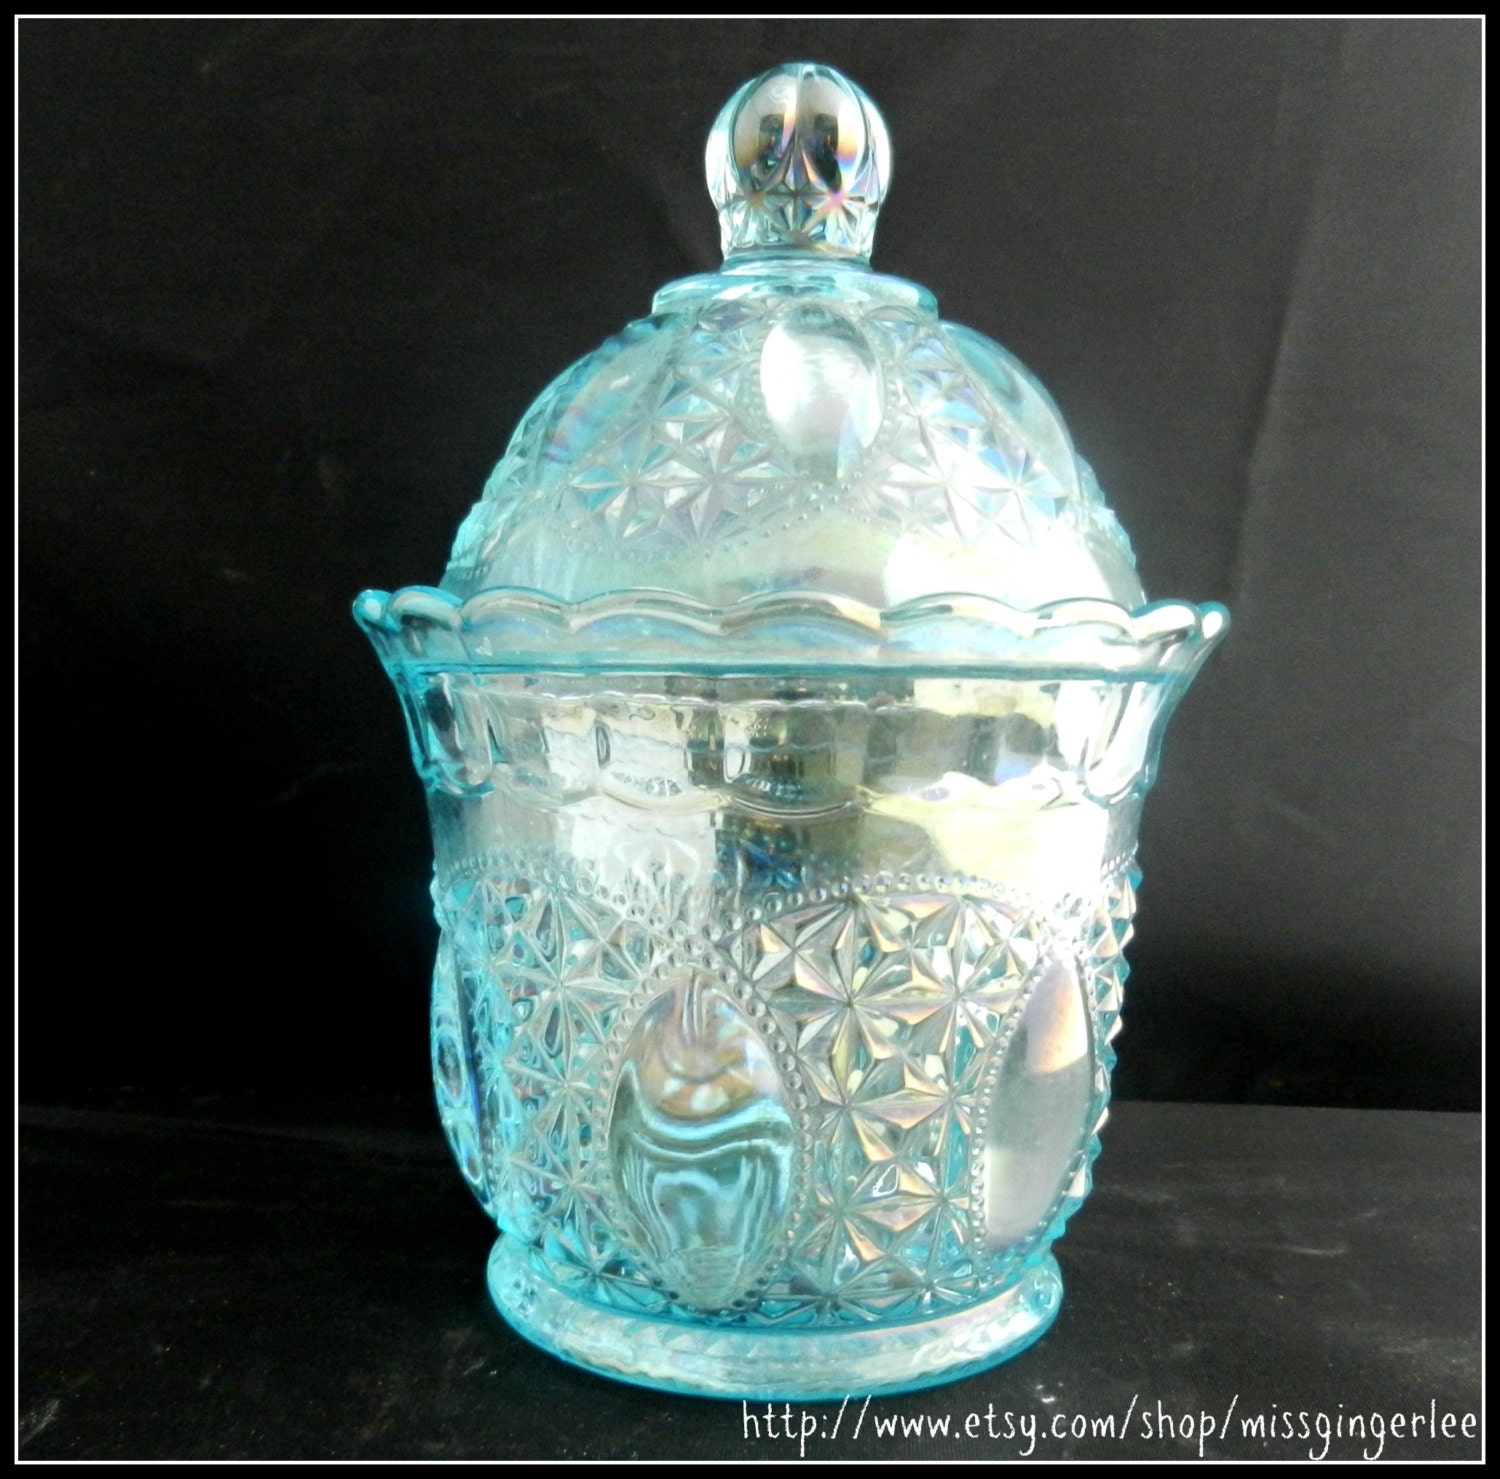 Vintage ice blue aqua Imperial Glass Company carnival glass Beaded Jewel Oregon candy jar with lid